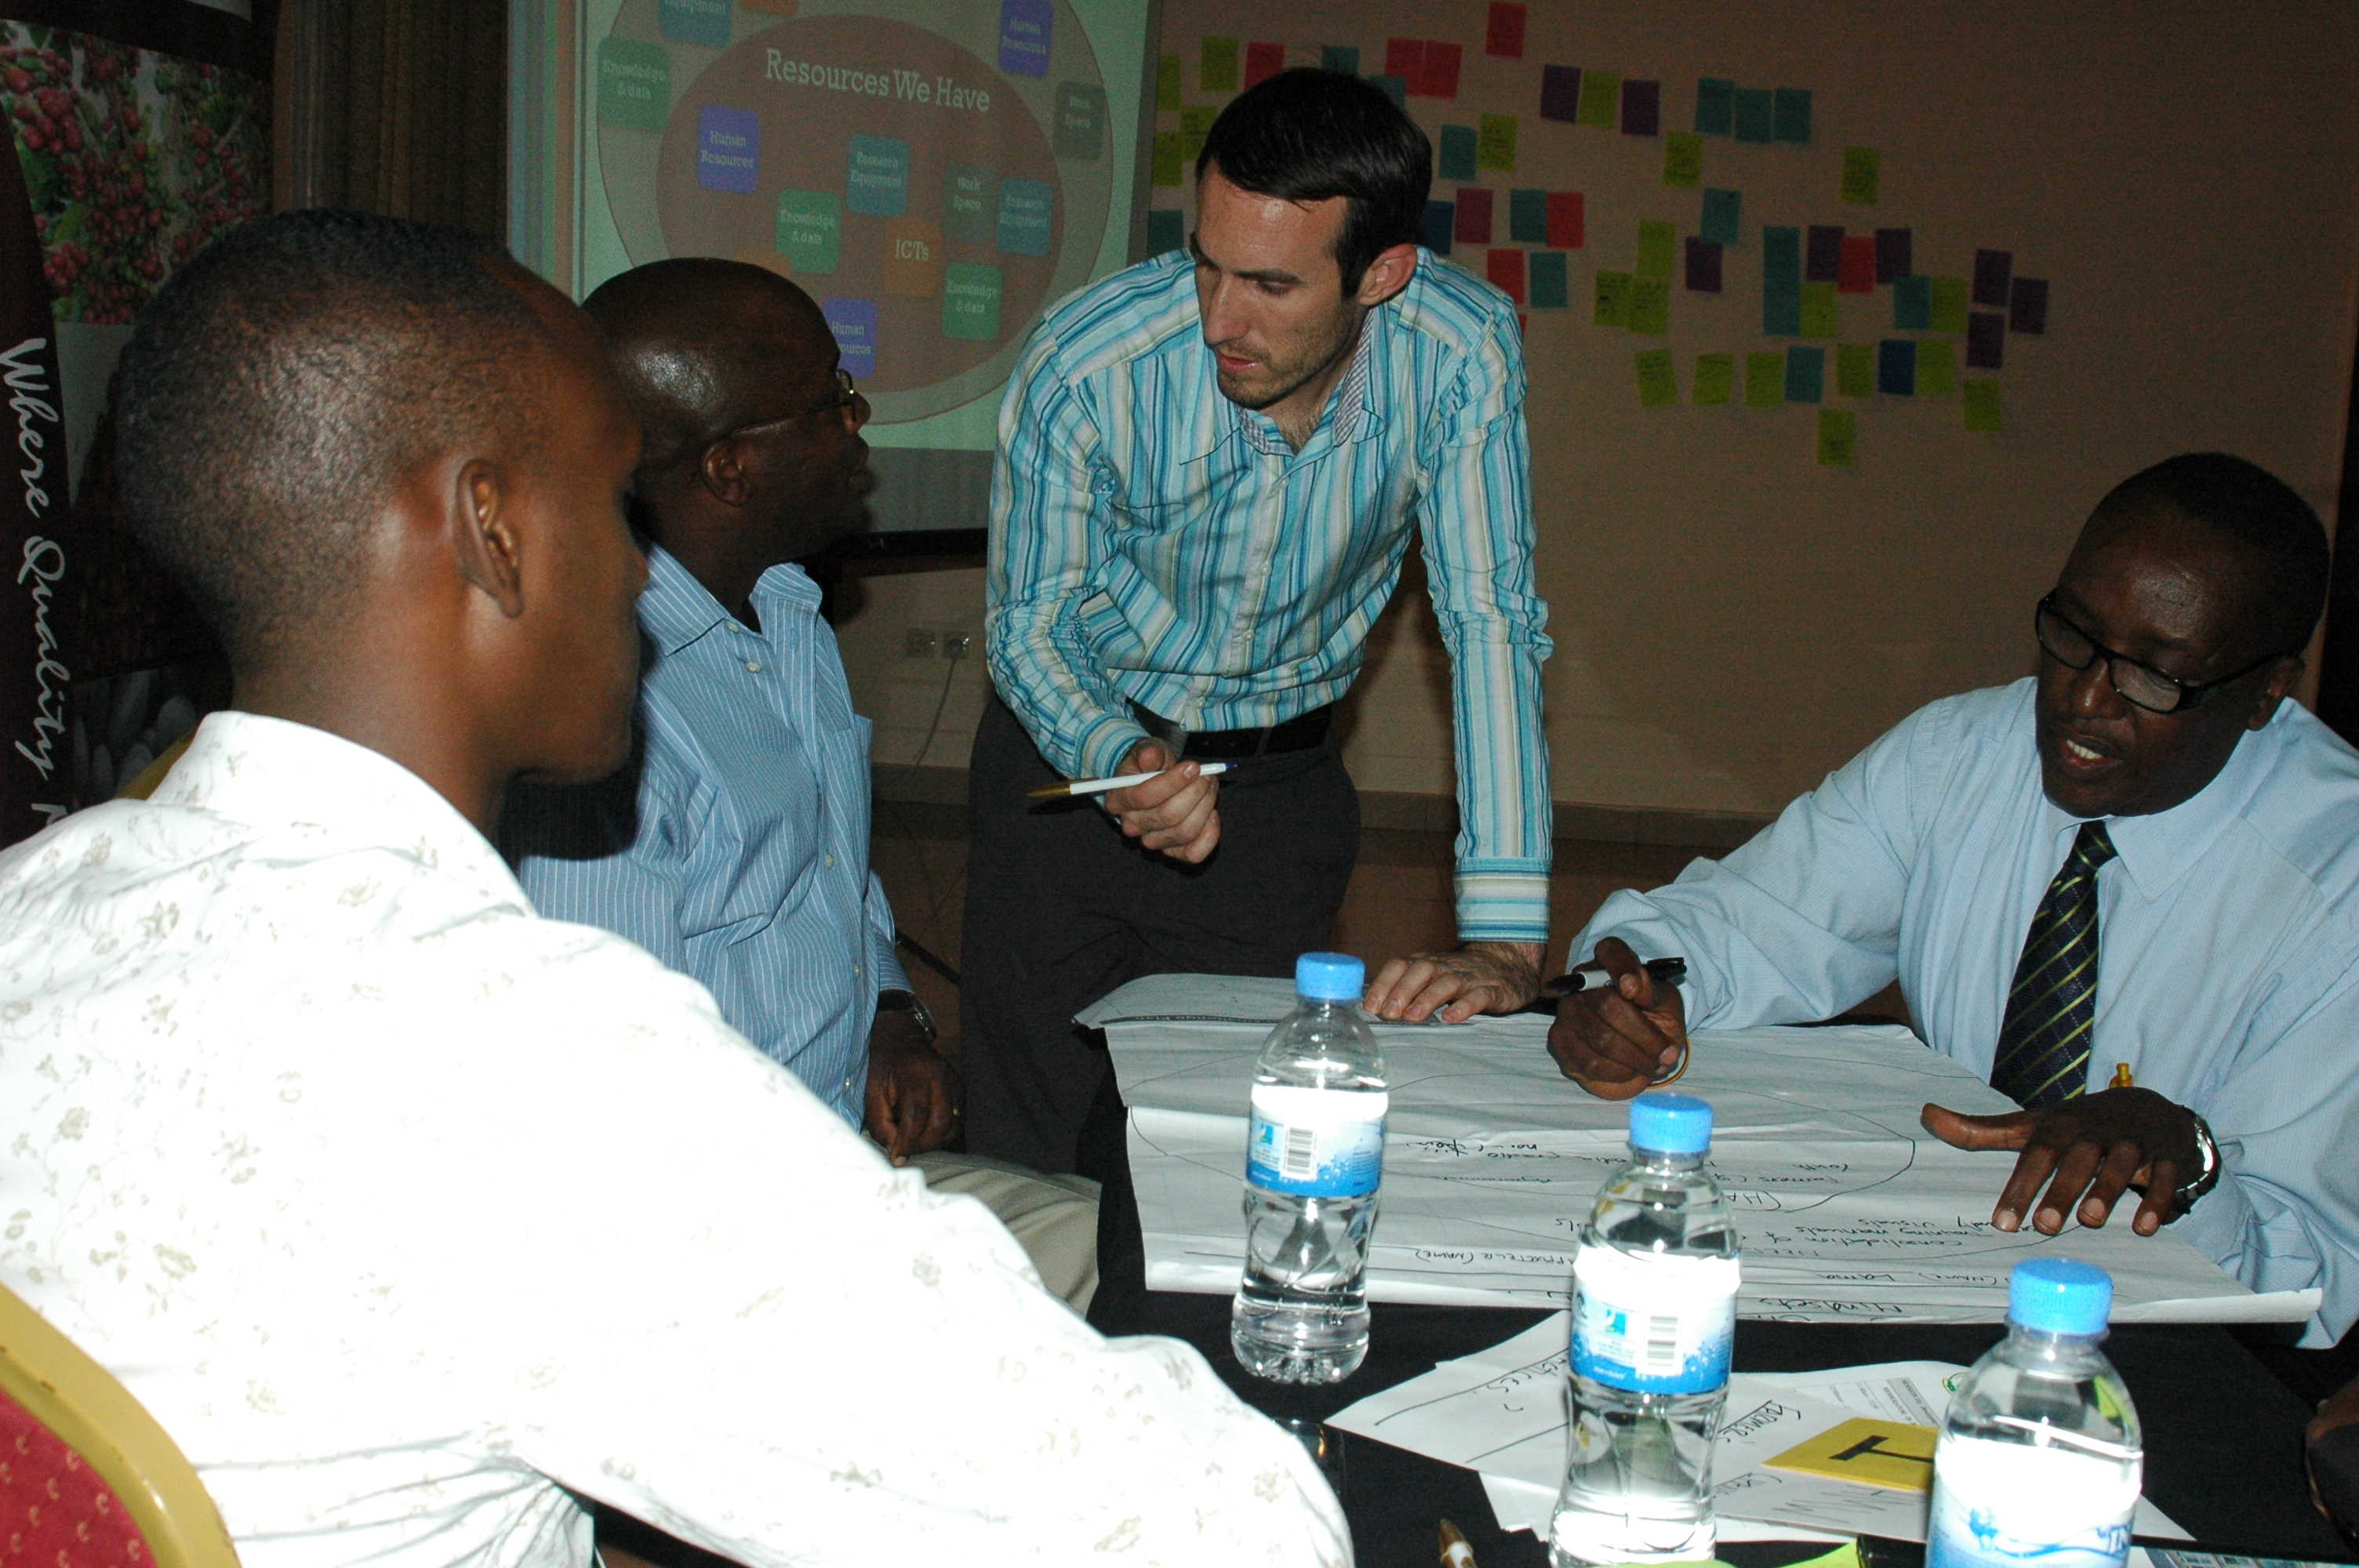 Participants map the resources they have and need to solve specific coffee challenges. Photo Credit: GKI